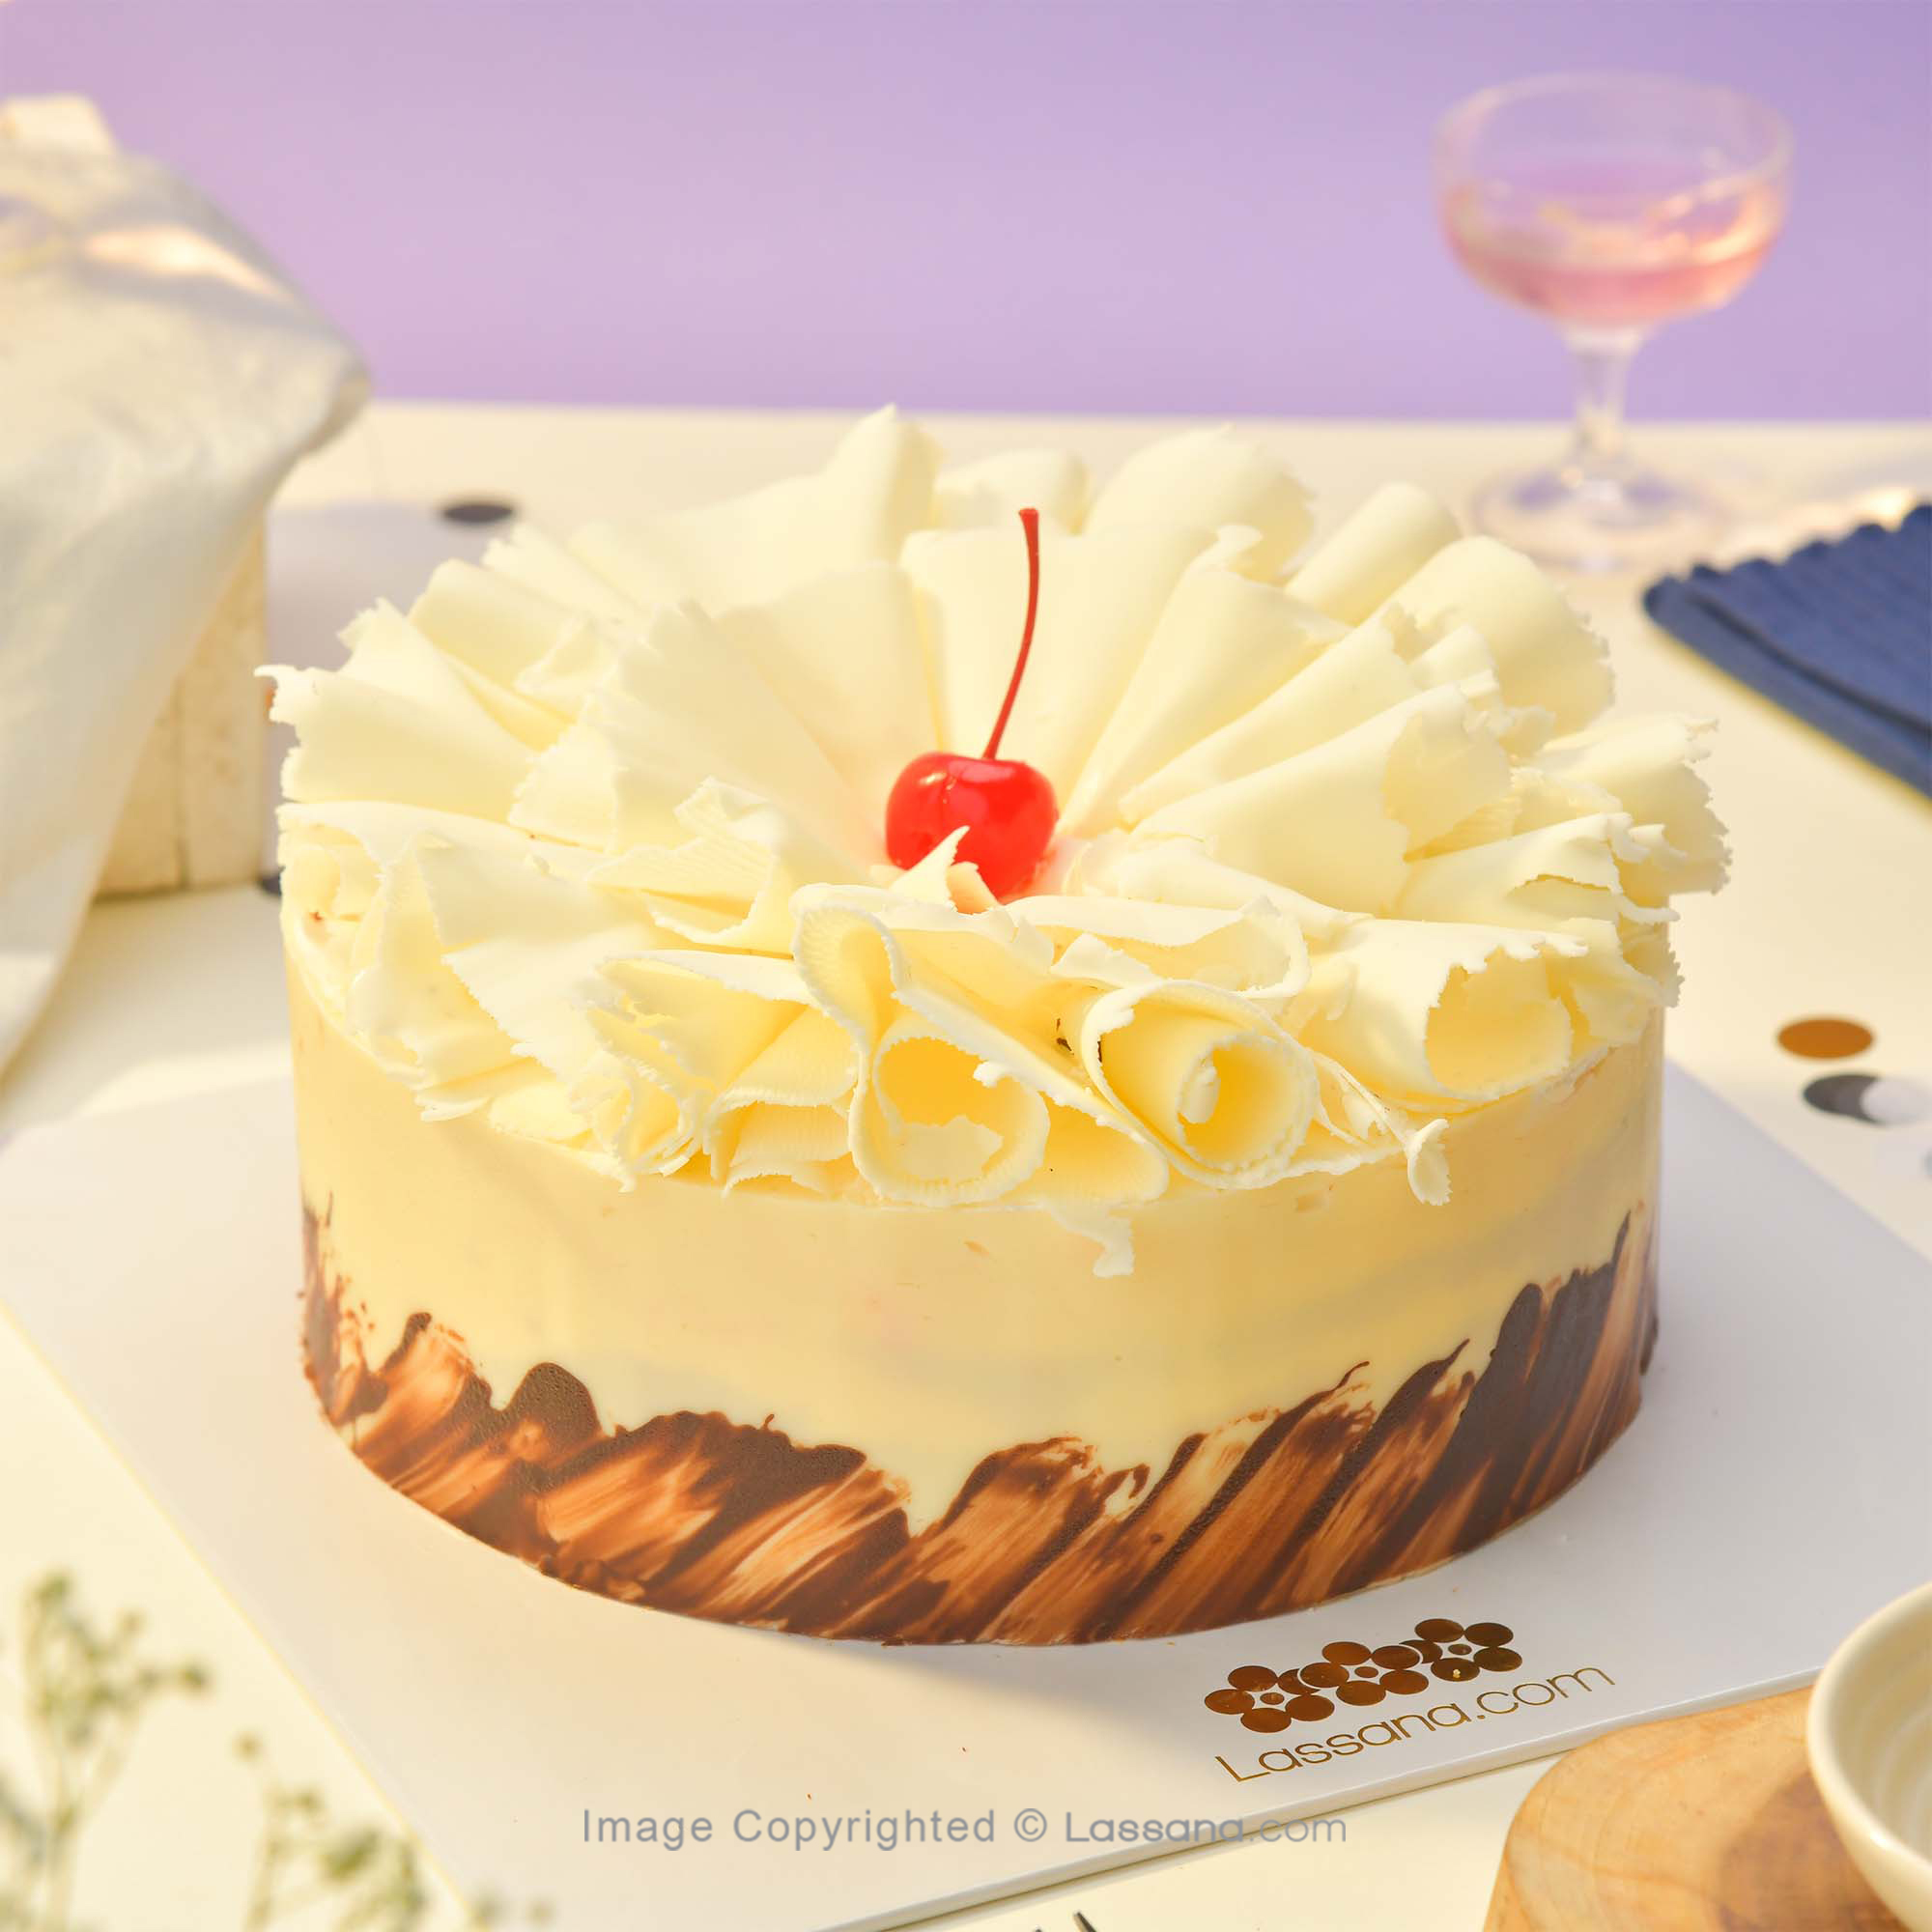 ROSE BLANC CAKE 1.3KG (2.8LBS) DELIVERED FREE IN OVER 100 CITIES - Lassana Cakes - in Sri Lanka